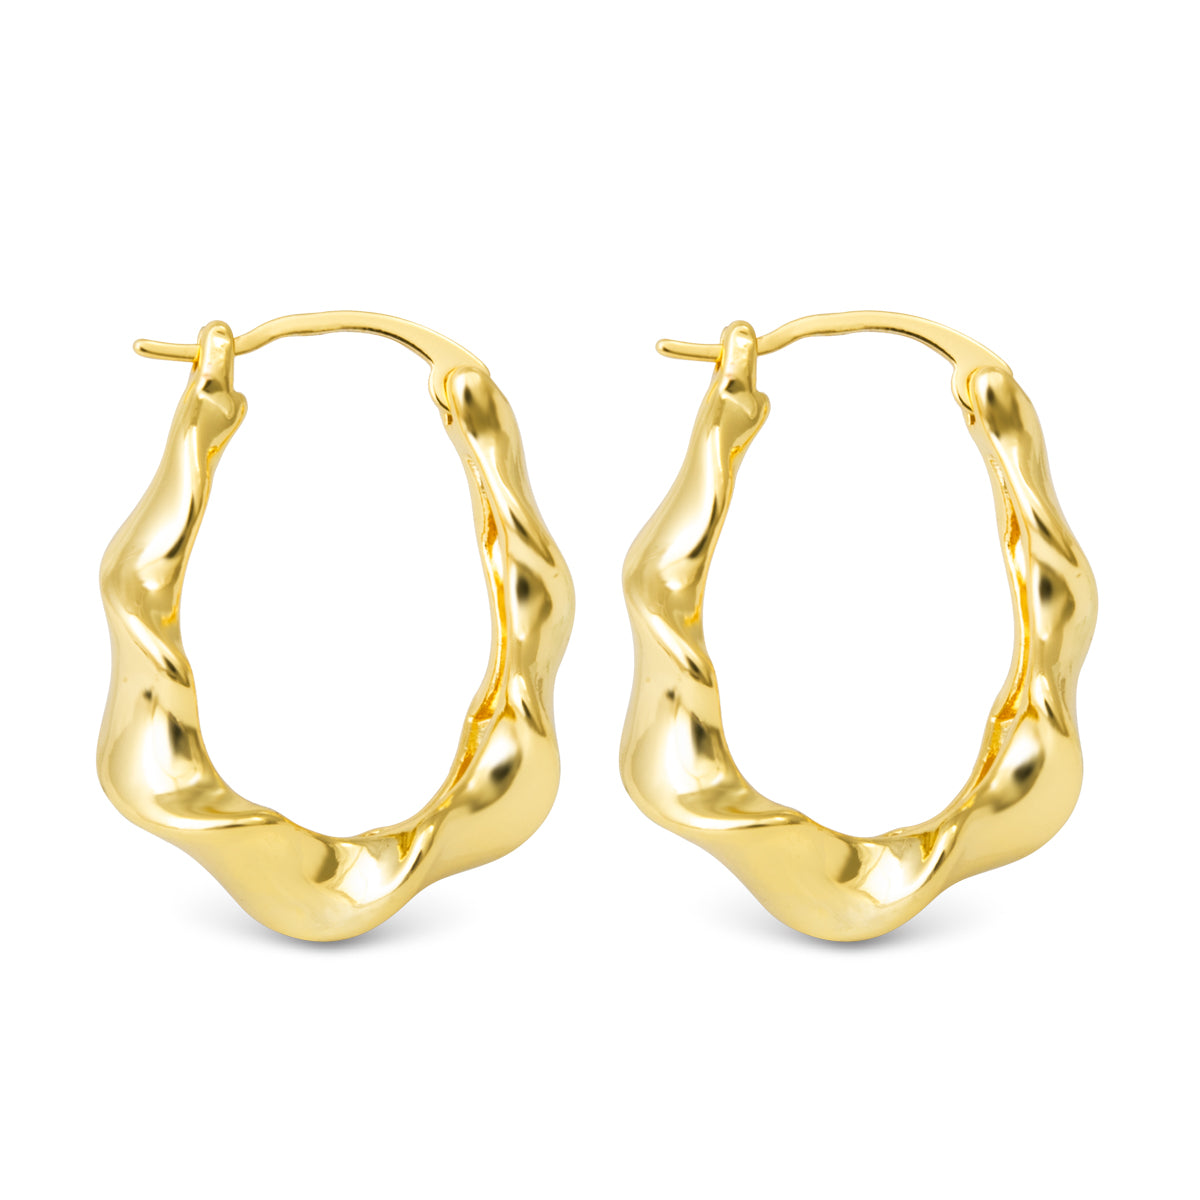 Hailey Polished Twisted Oval Hoops - Gold